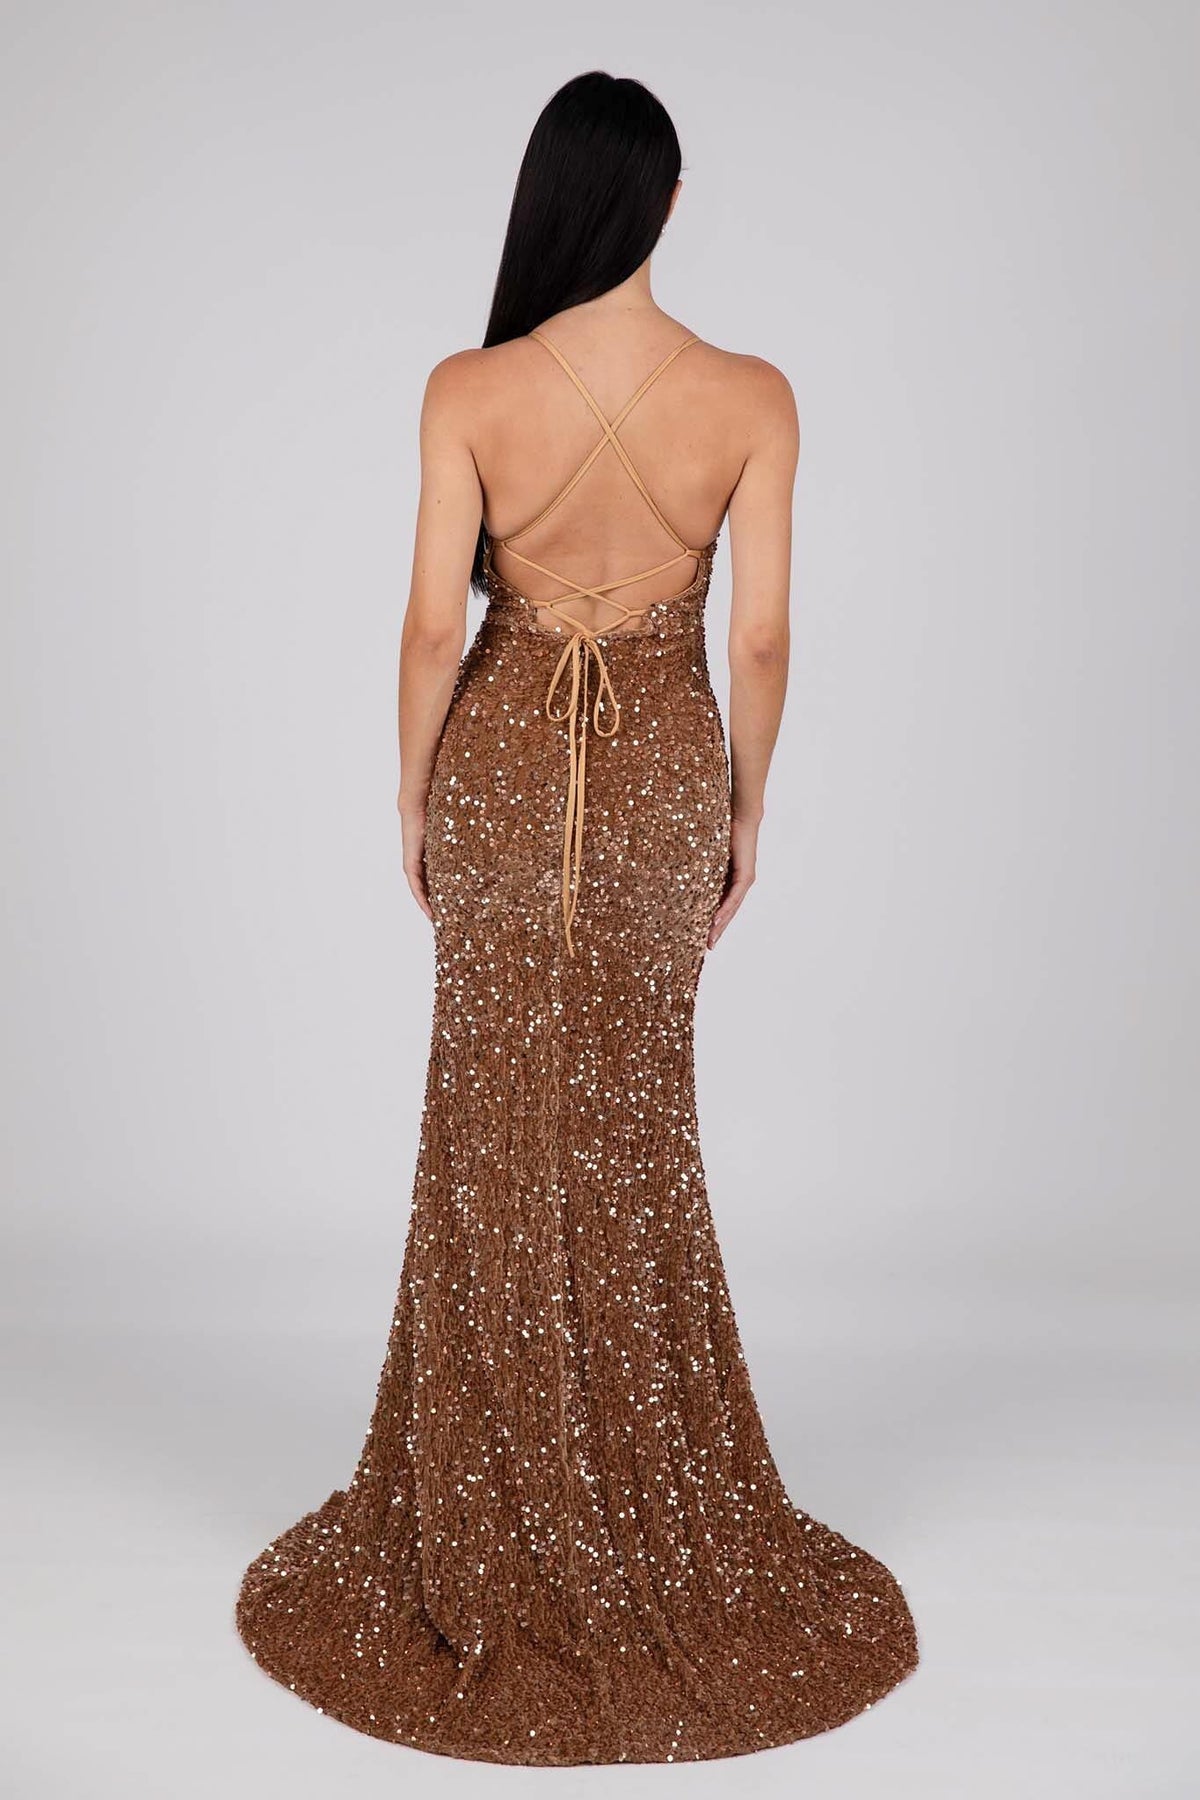 Lace Up Open Back of Bronze Gold Colored Velvet Sequin Full Length Evening Gown with V Neckline, Thin Shoulder Straps and Thigh High Side Split